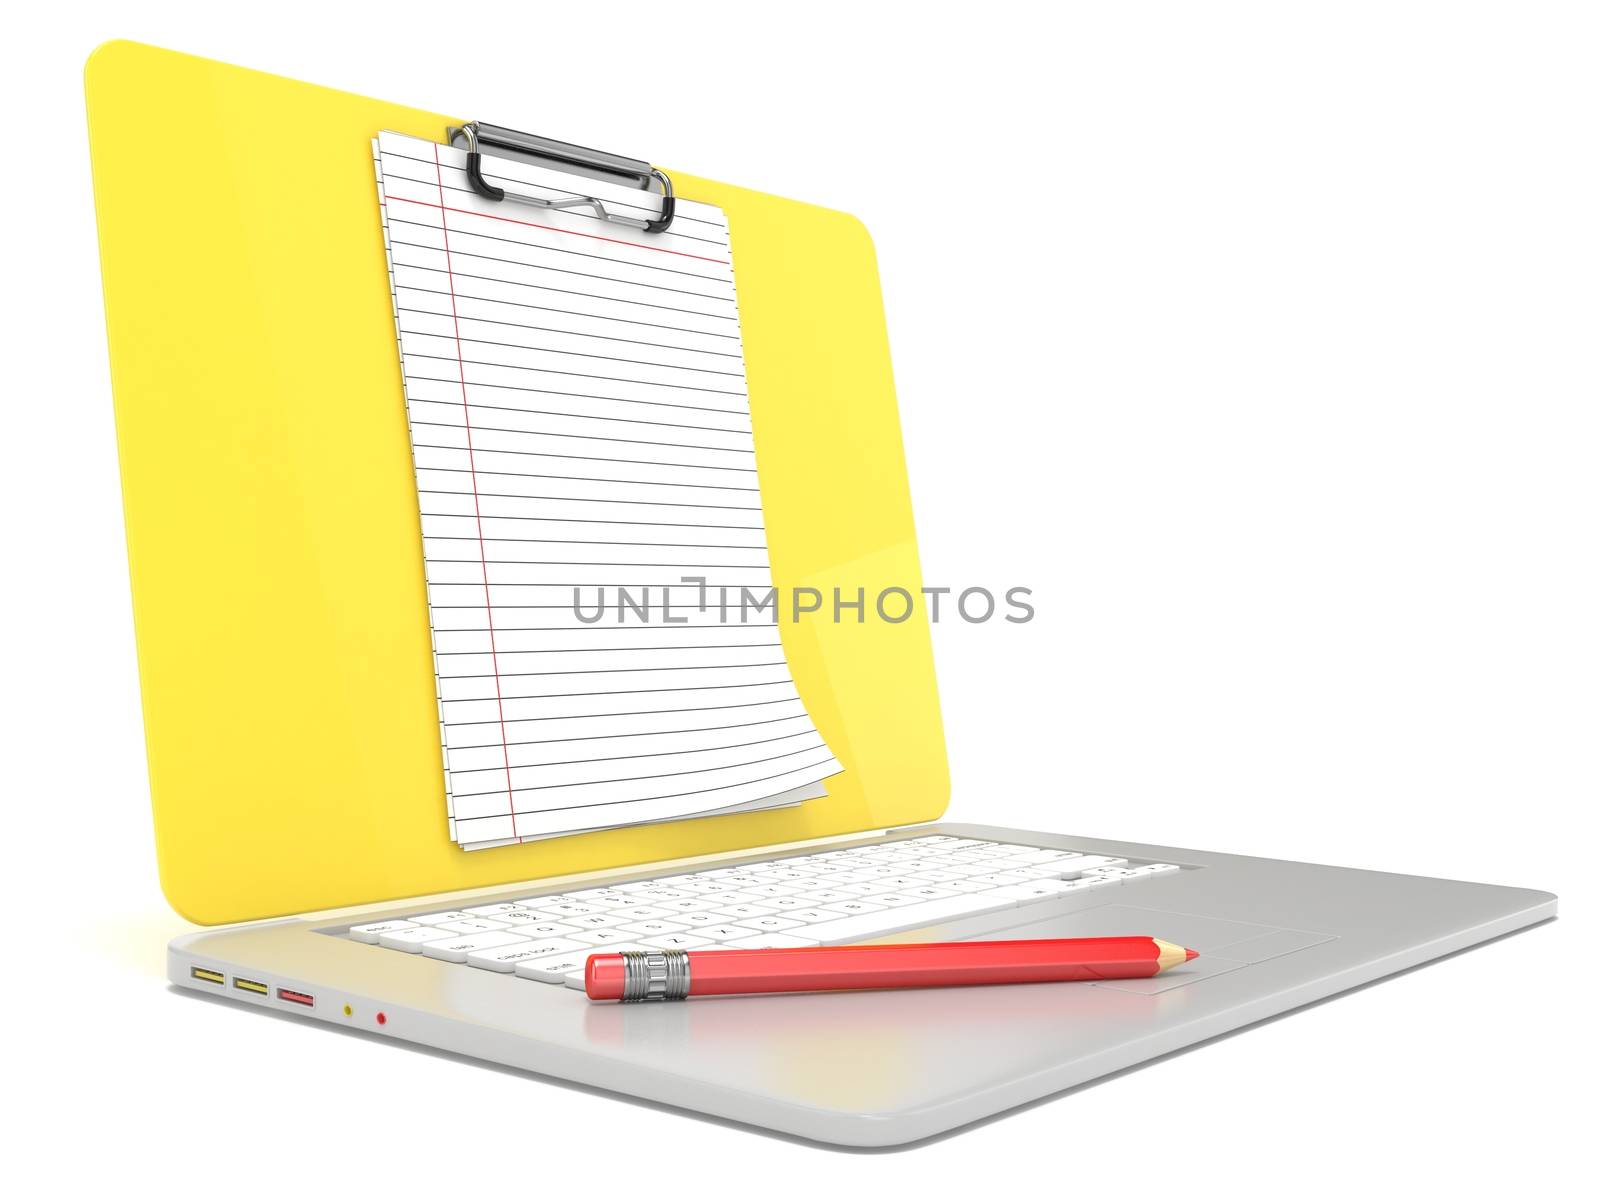 Blank clipboard lined paper on laptop. Side view. 3D render illustration isolated on white background